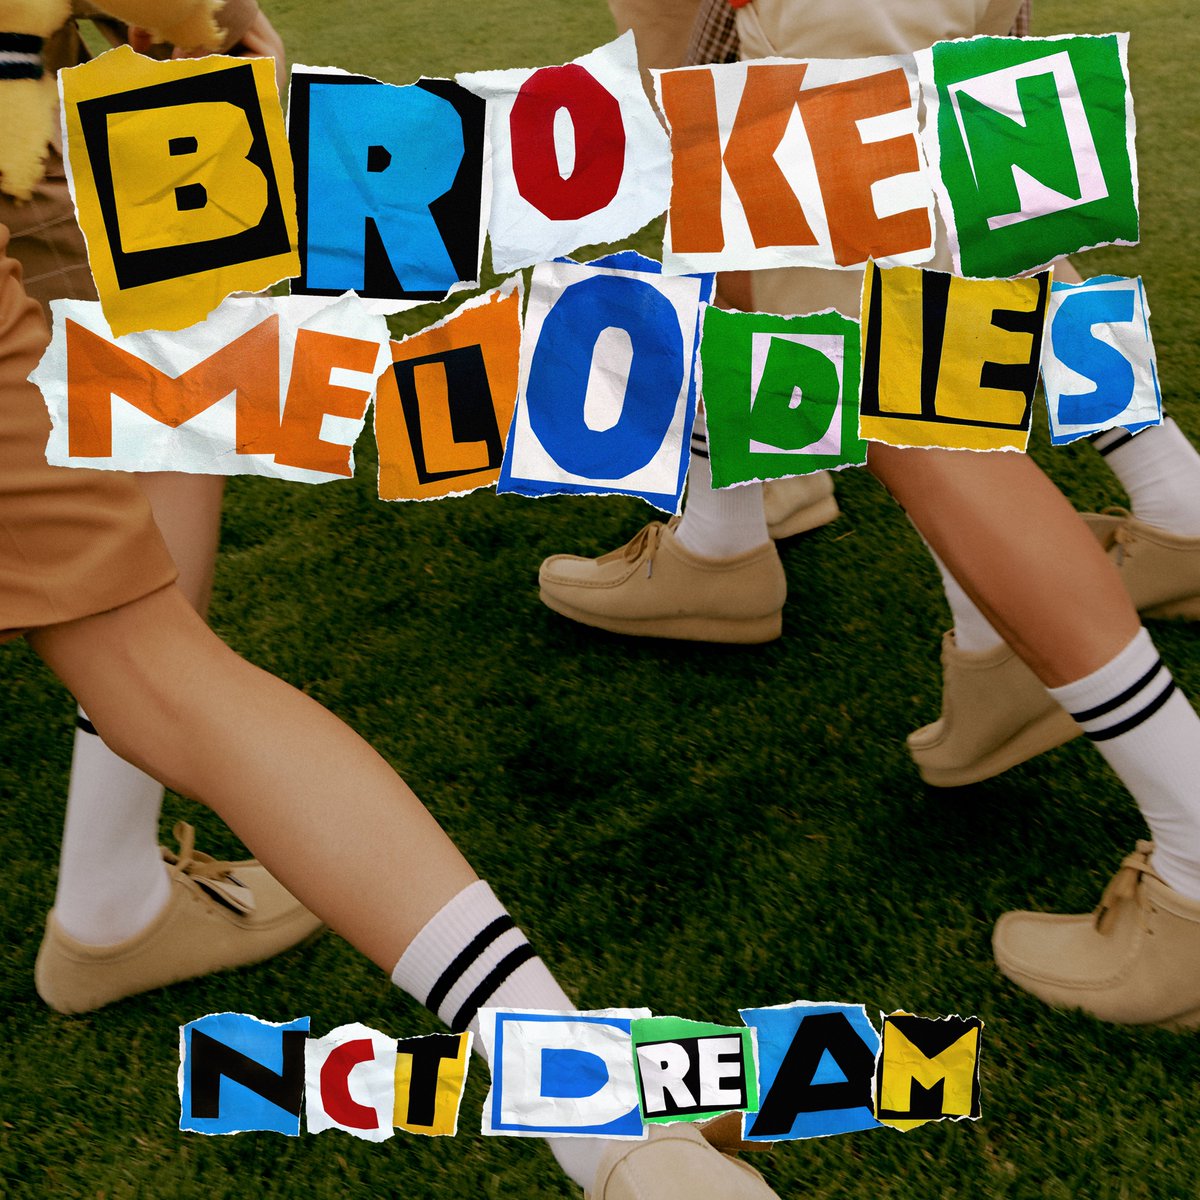 Pre-save & add ‘Broken Melodies’ now!

Pre-Release ‘Broken Melodies’
➫ 2023.06.19 6PM (KST)
Pre-save & add ‘Broken Melodies’ : NCTDREAM.lnk.to/BrokenMelodies

NCT DREAM The 3rd Album 【ISTJ】
Digital & Physical Album ➫ 2023.07.17 6PM (KST)
US/EU/LATAM/ANZ Physical Album Release ➫…